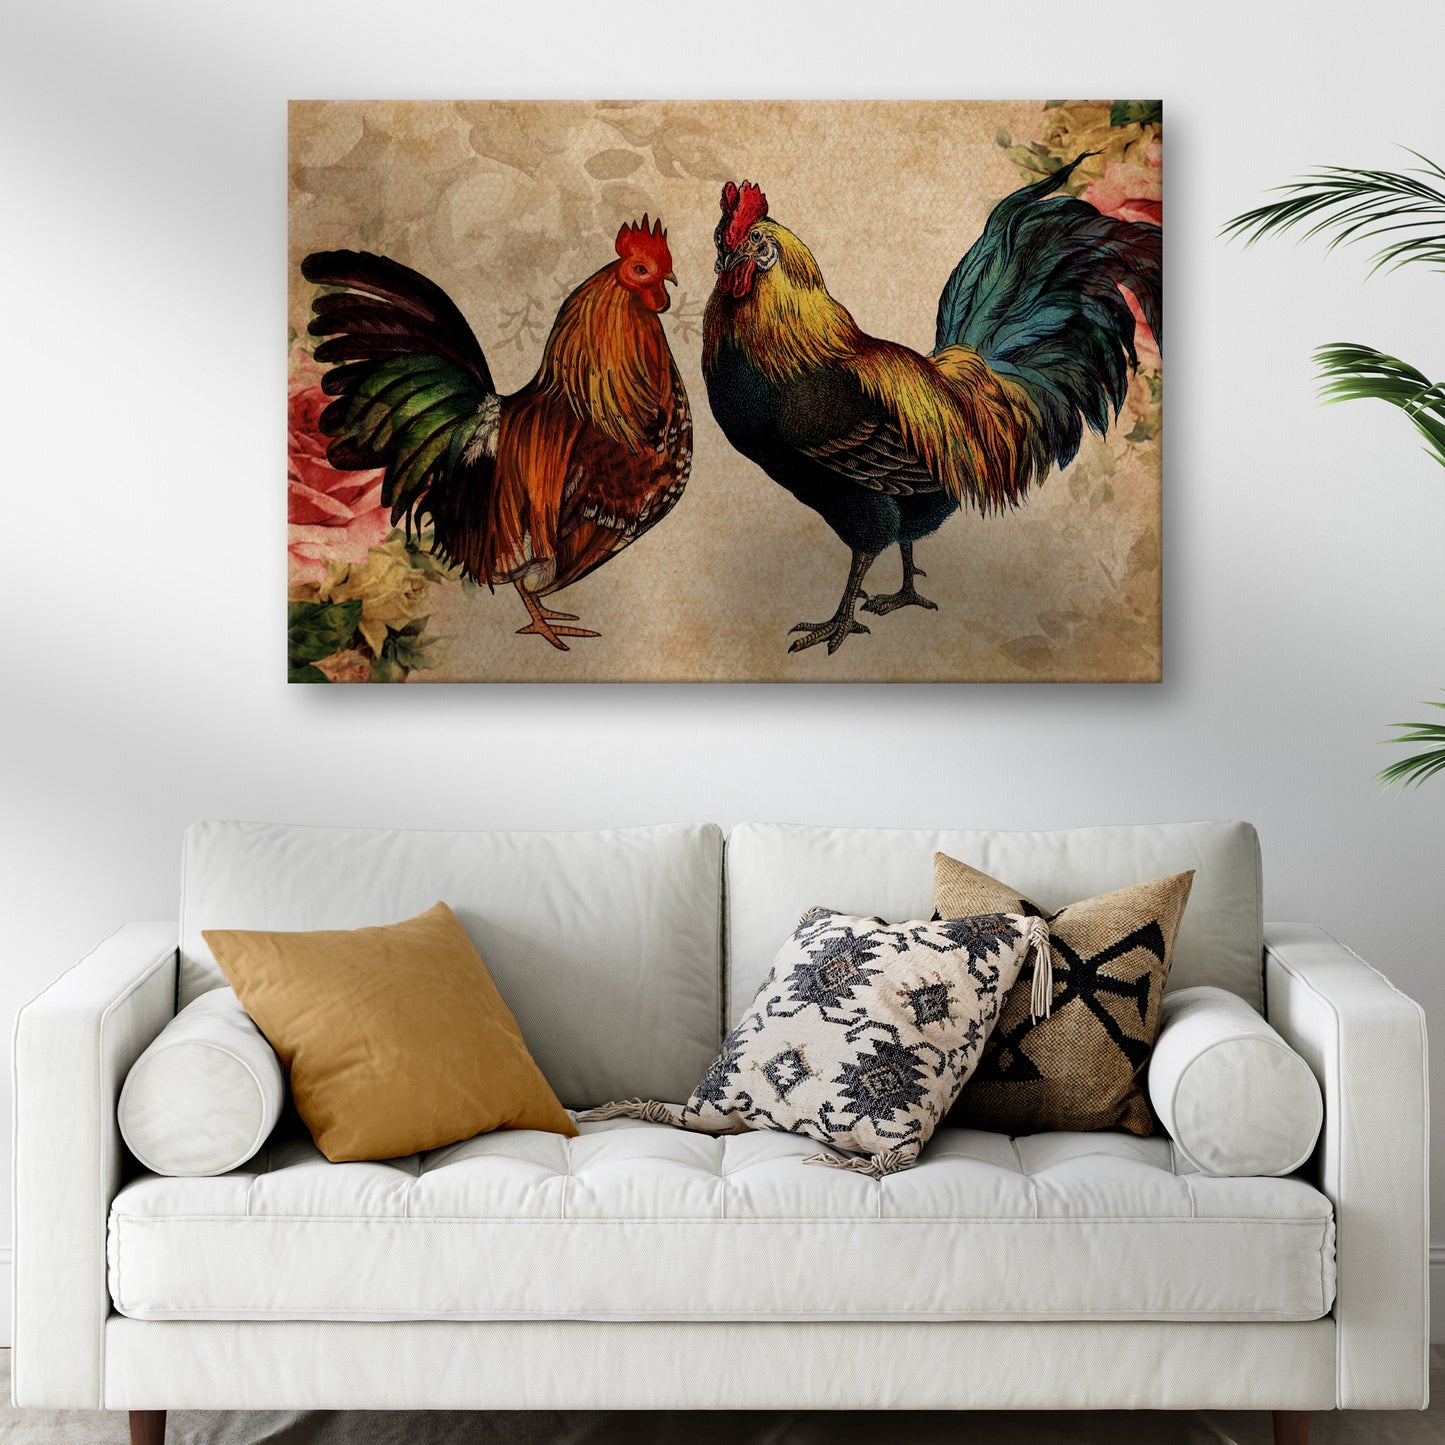 Retro Rooster Chicken Canvas Wall Art - Image by Tailored Canvases